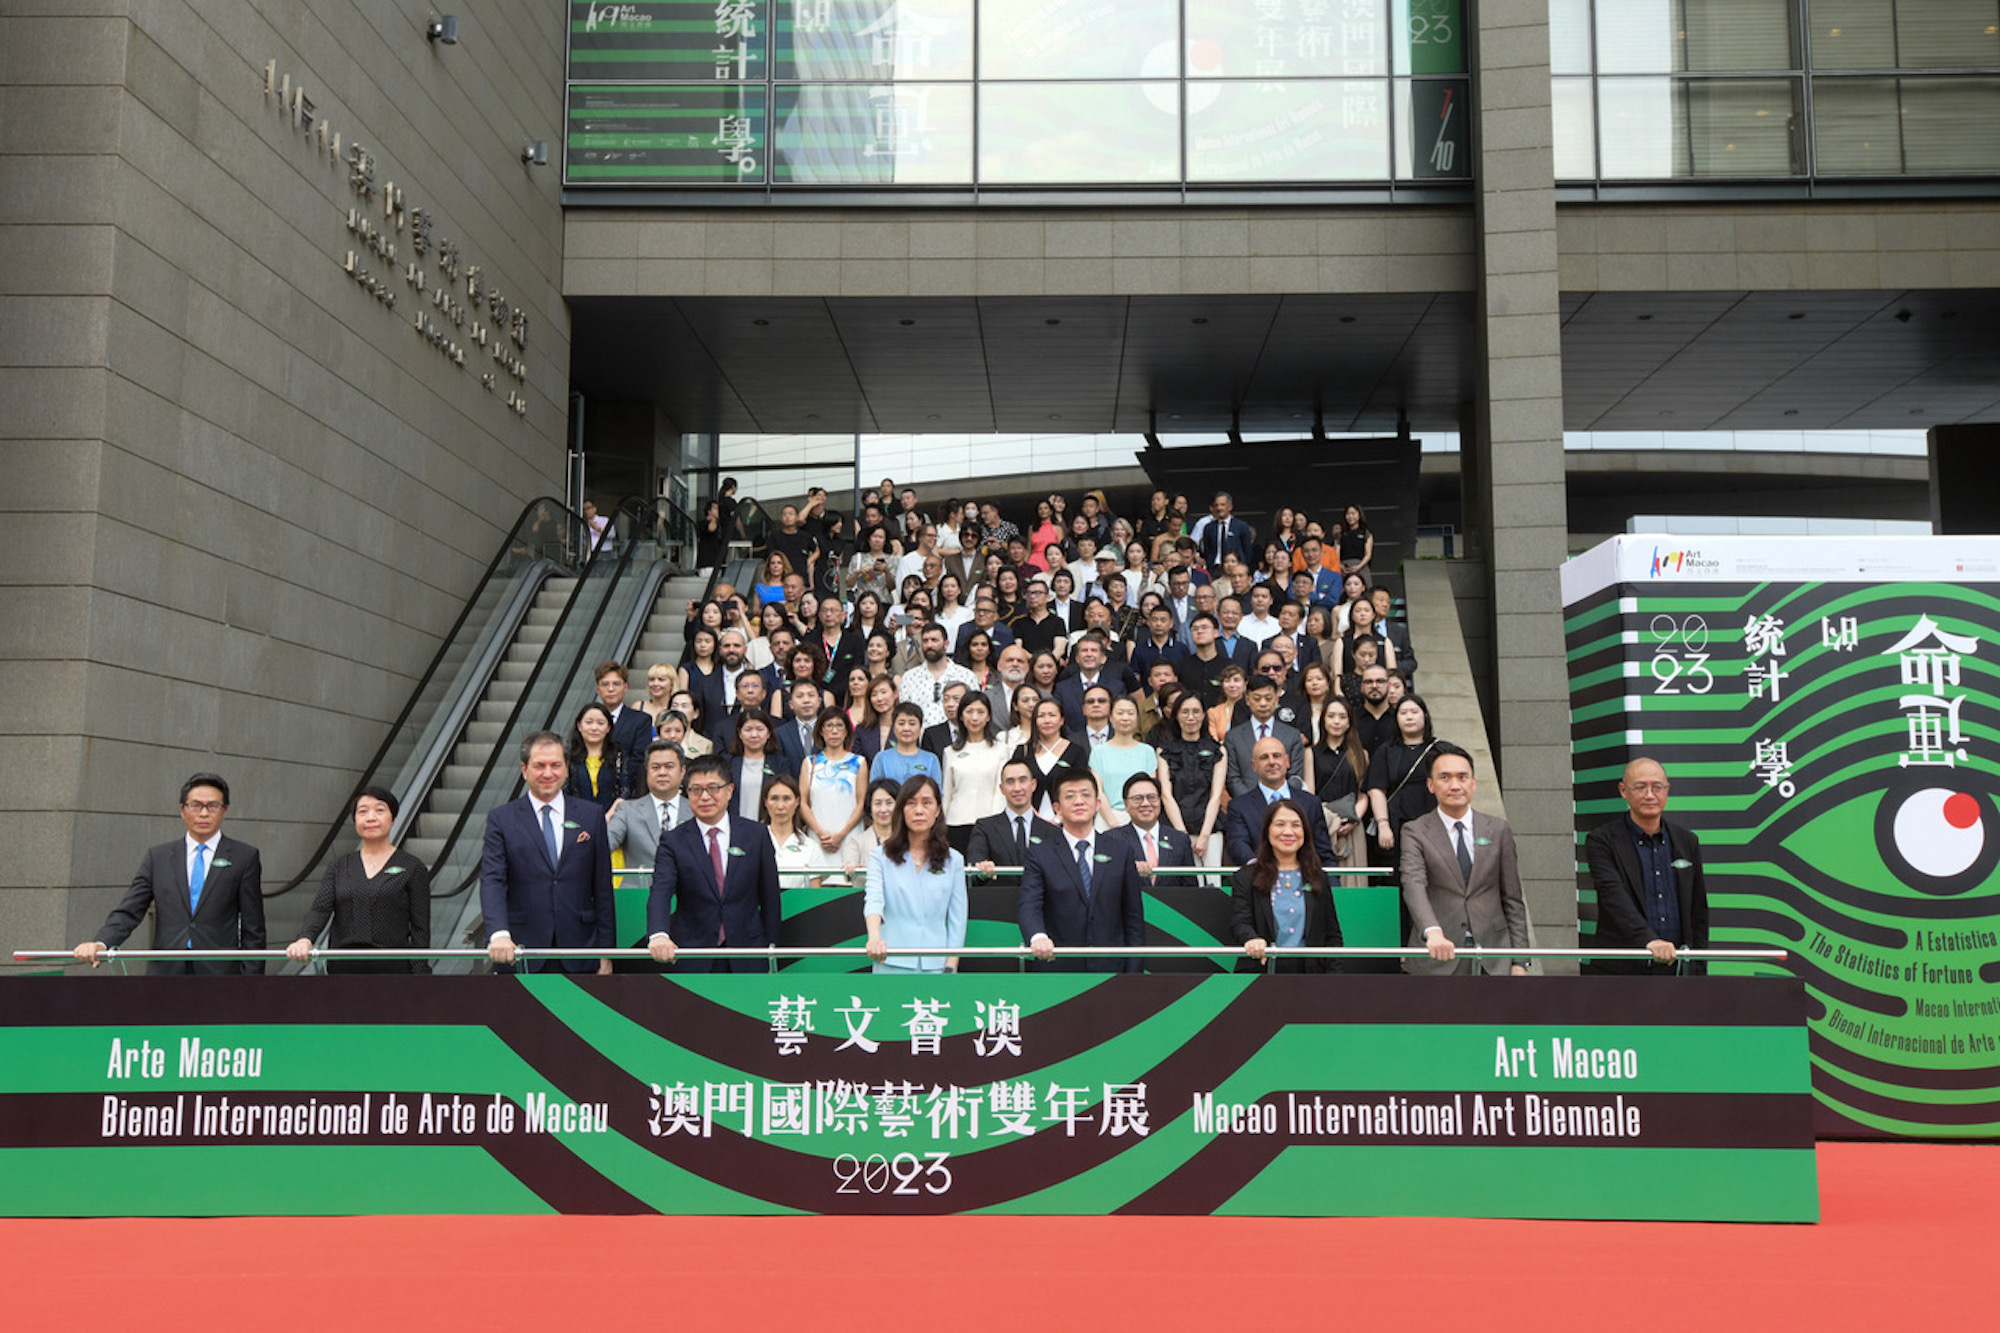 Government officials, artists and chief curator gathered at the Macao Museum of Art on 28 July for the festival’s opening ceremony